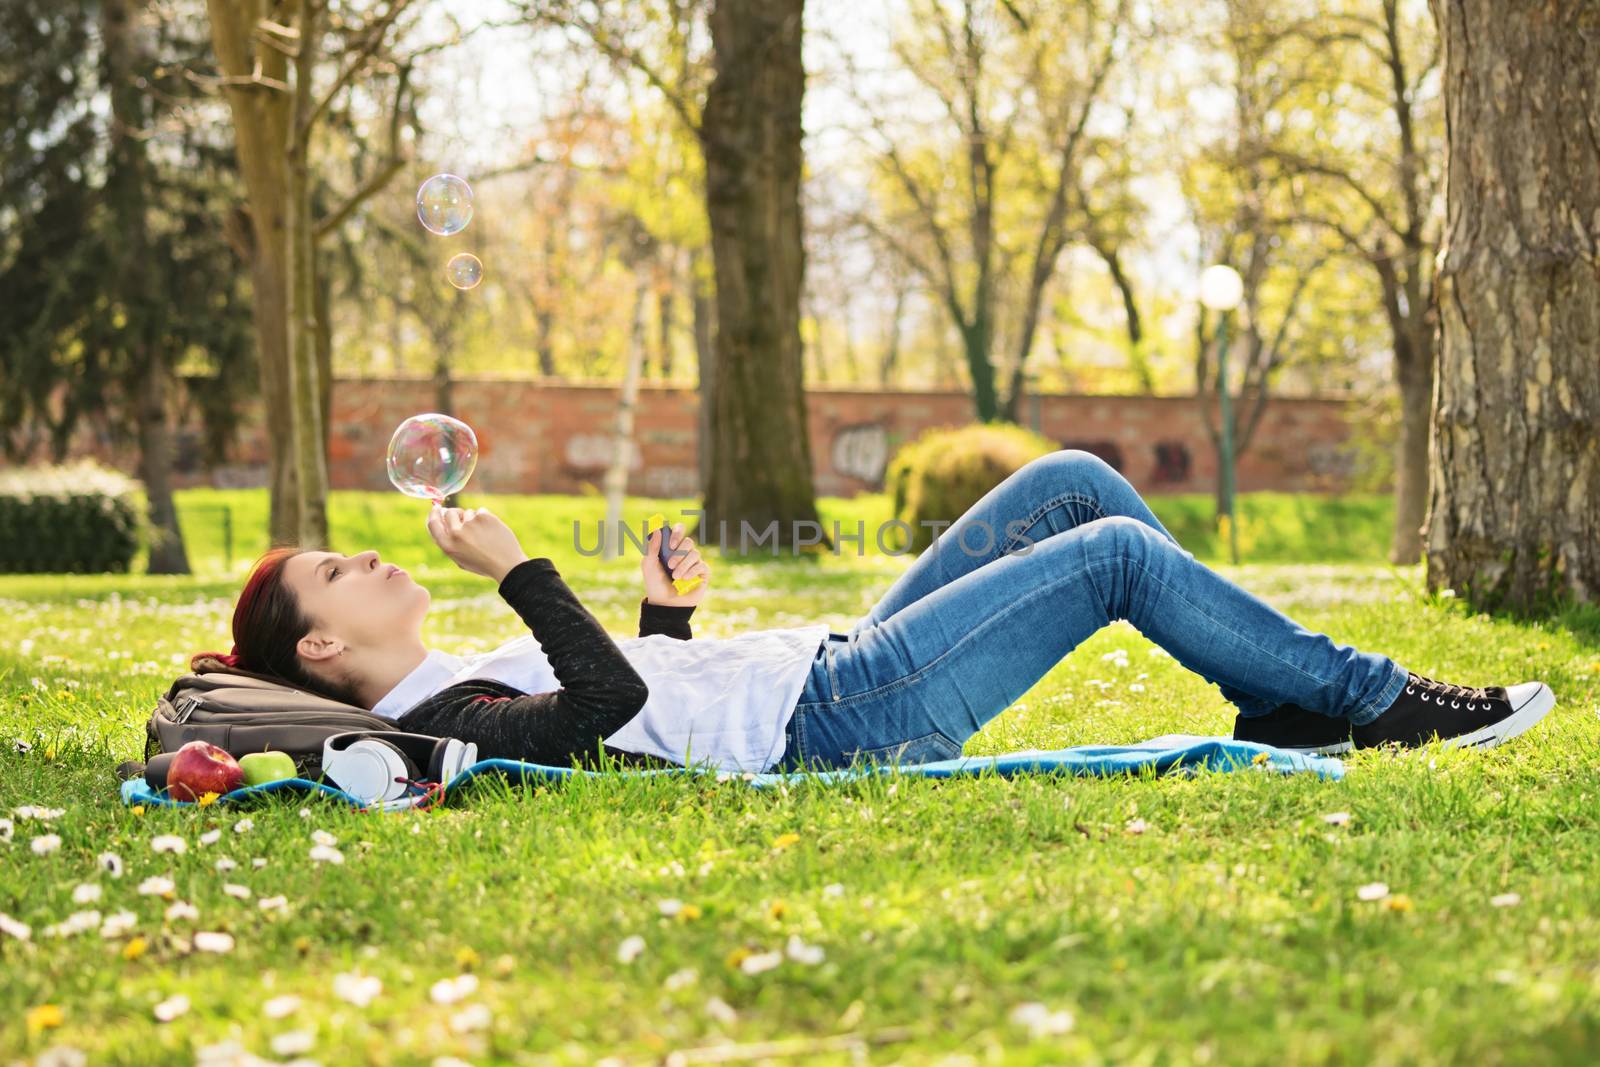 Daydreaming in the park. Beautiful young student girl lying on a meadow blowing soap bubbles, taking a break from studying.